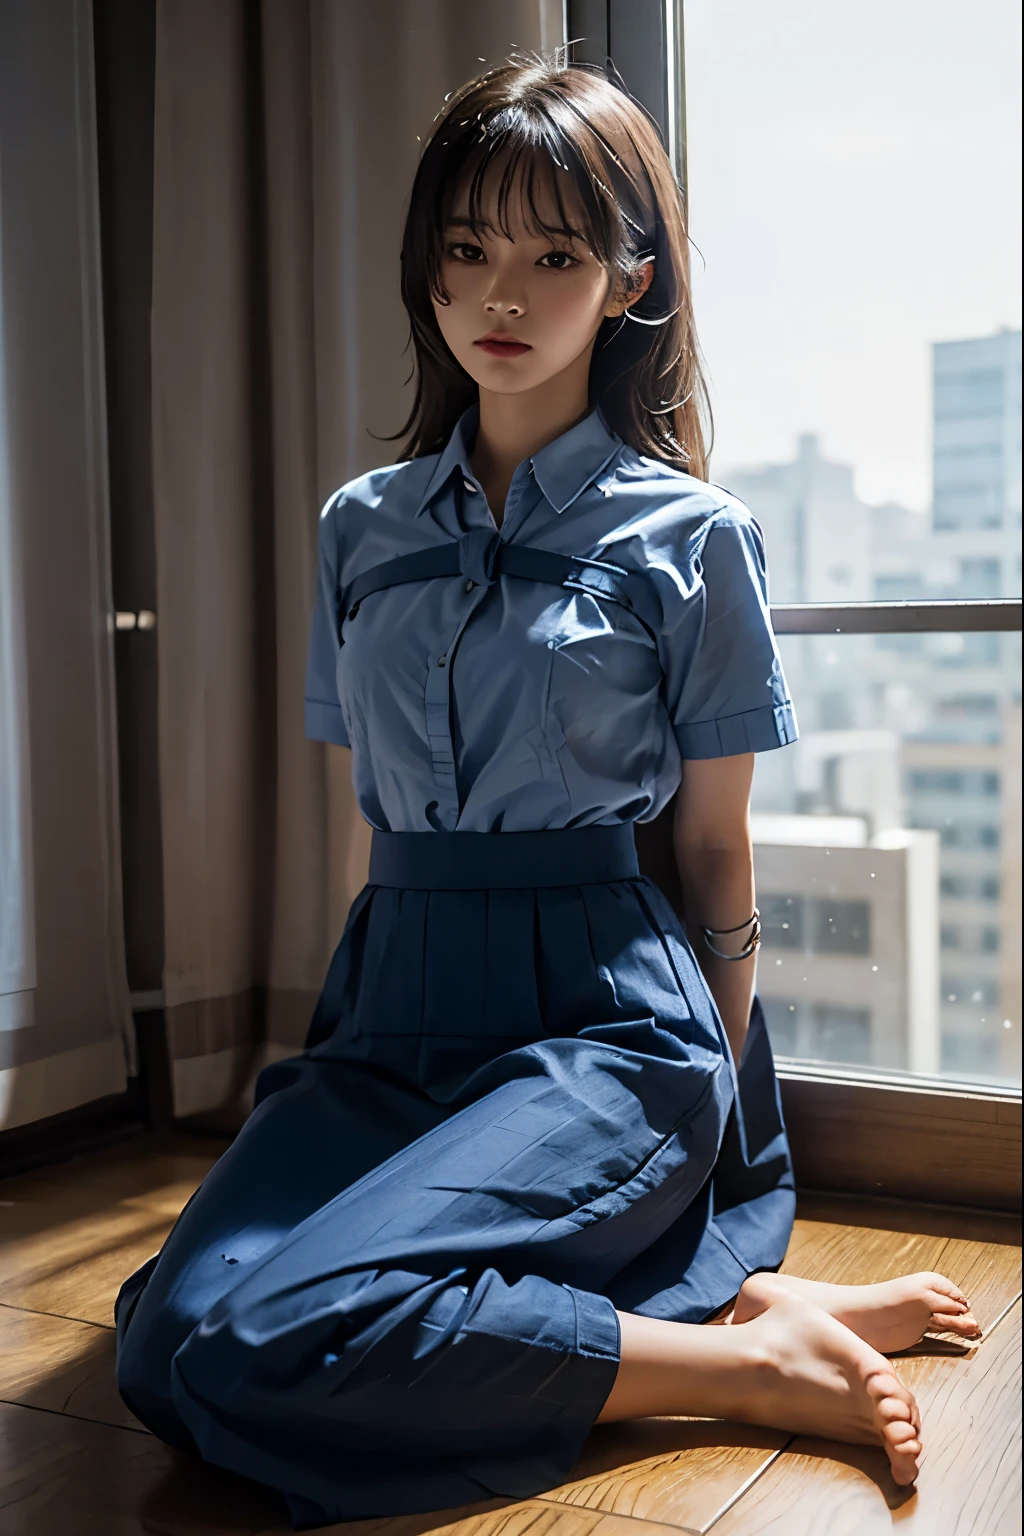 A cute girl is confined and tied up、A room with the lights on at night、Blue semi-long skirt、Red short sleeve shirt、Sitting on the floor、Beauty、Age 25、Medium build、Outside the window is night、Like real life、